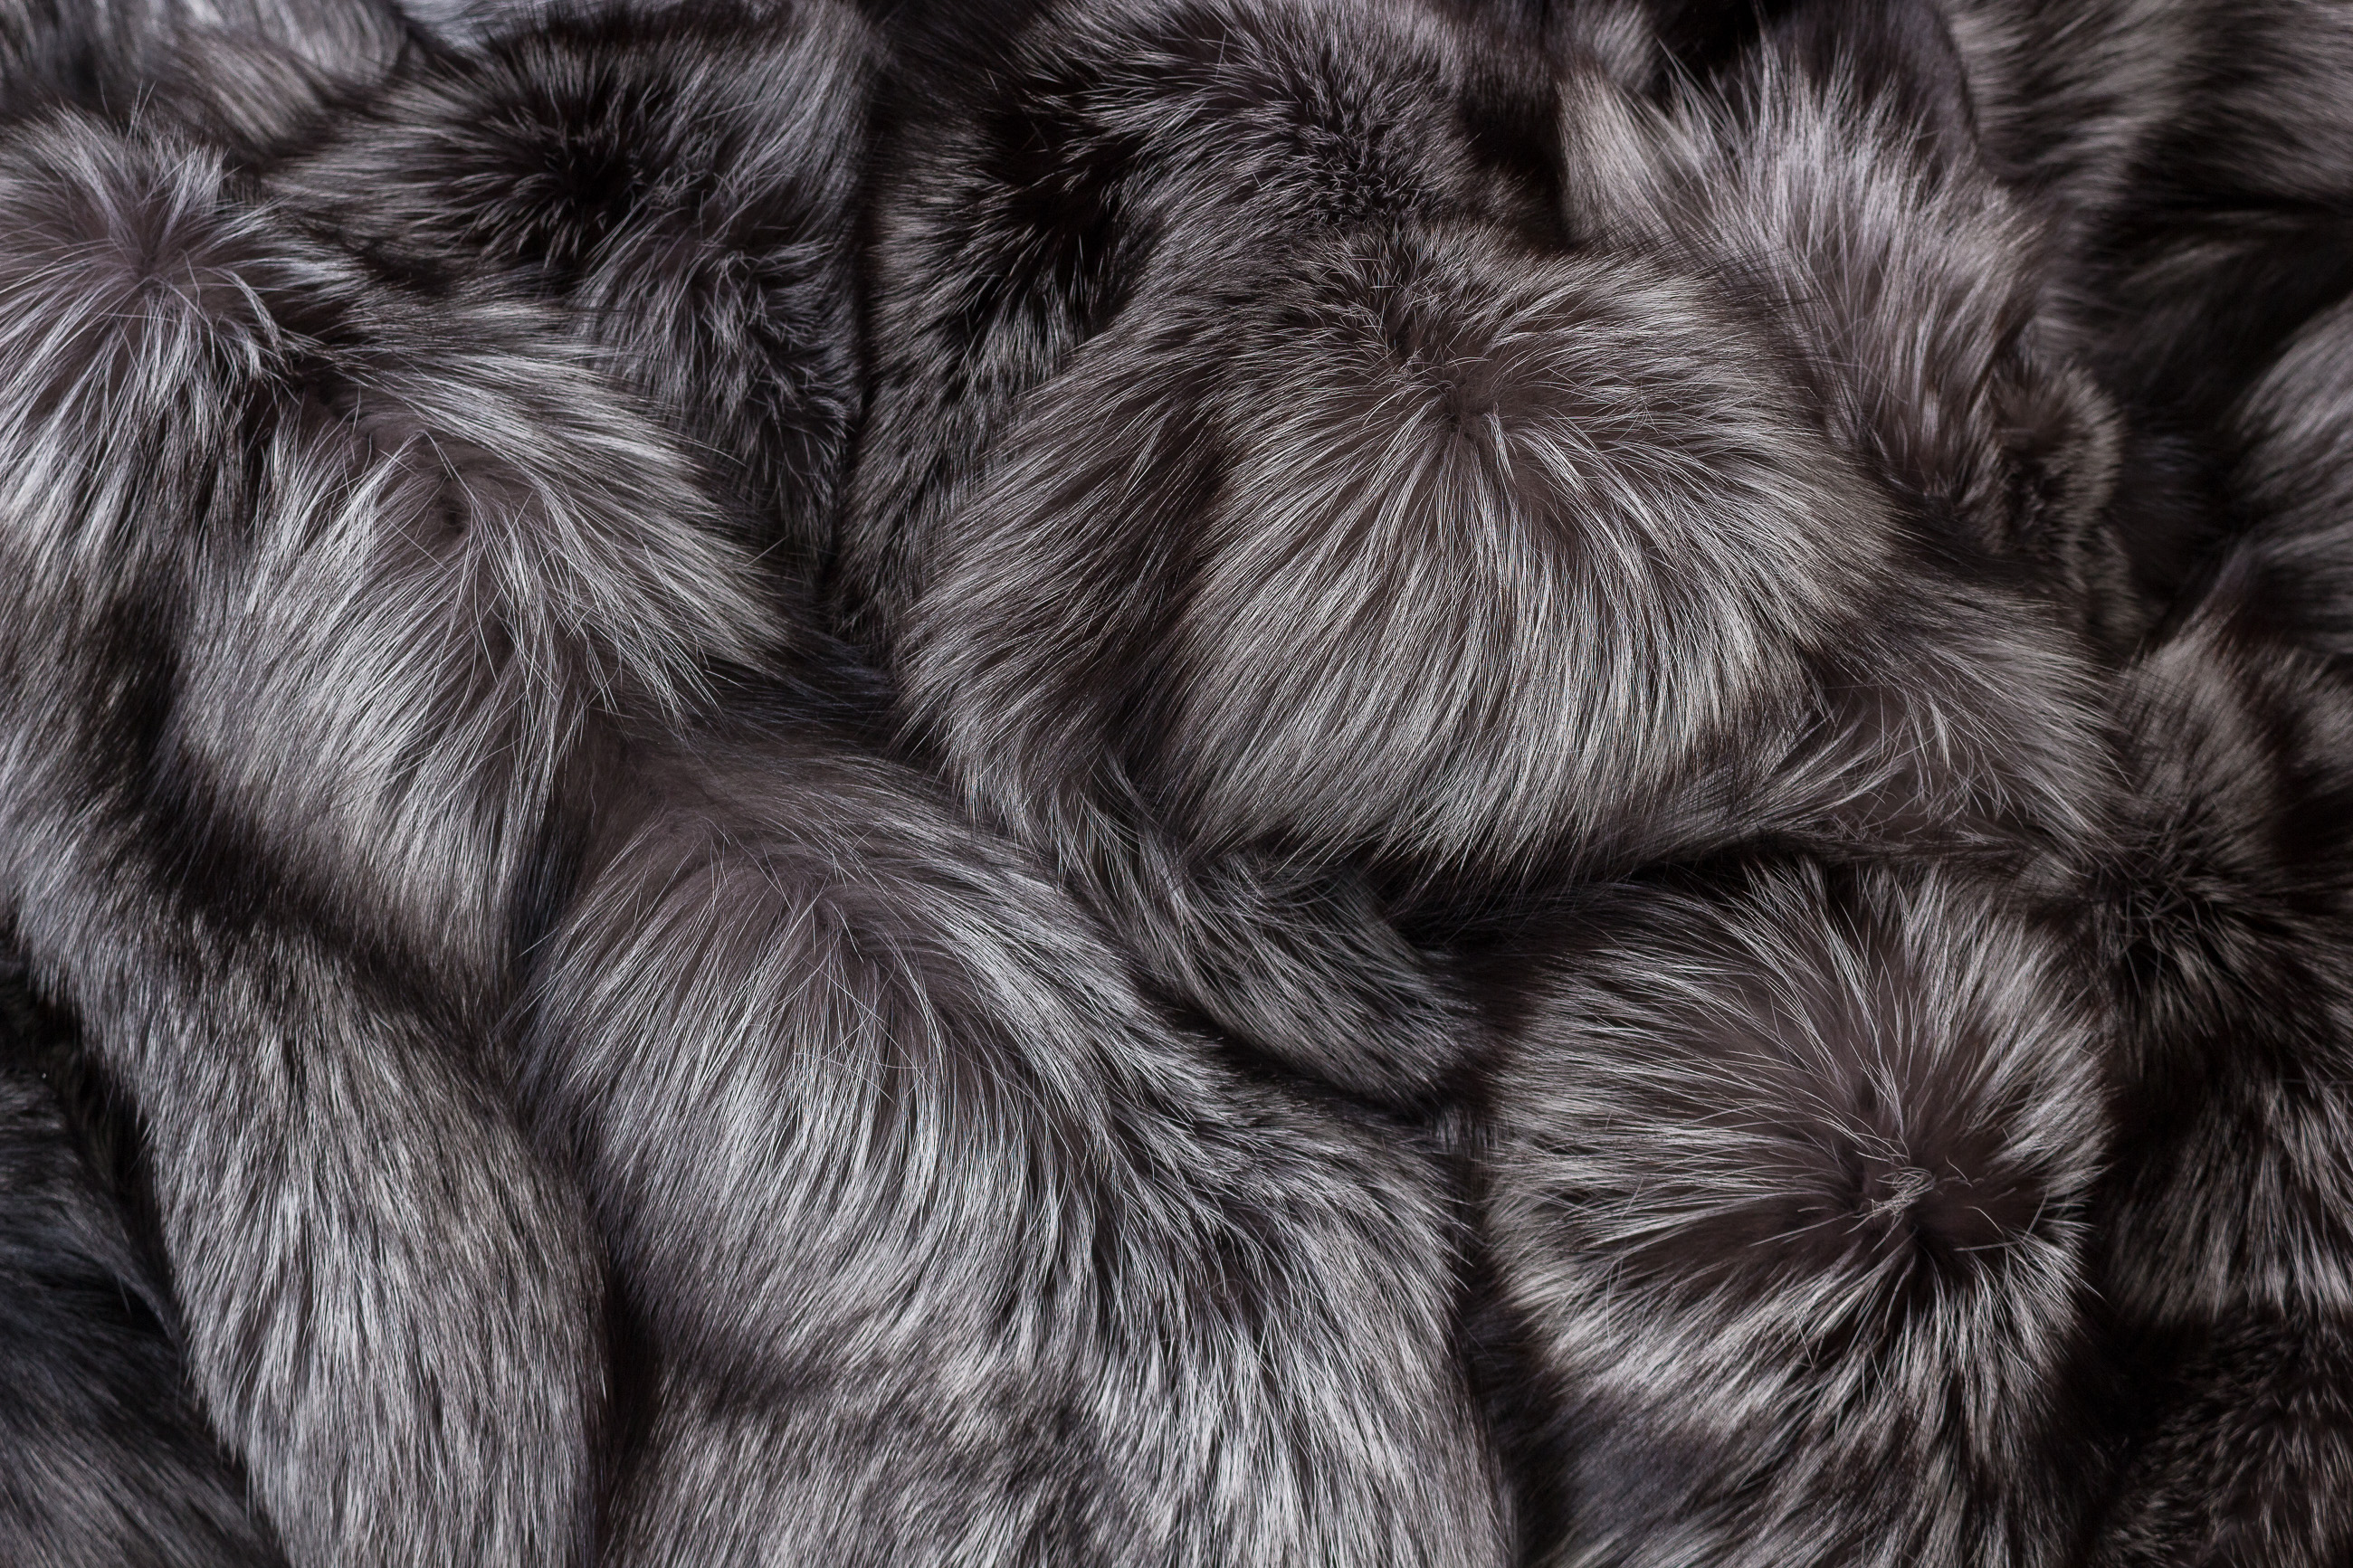 Fur Rug made with Scandinavian Silver Foxes